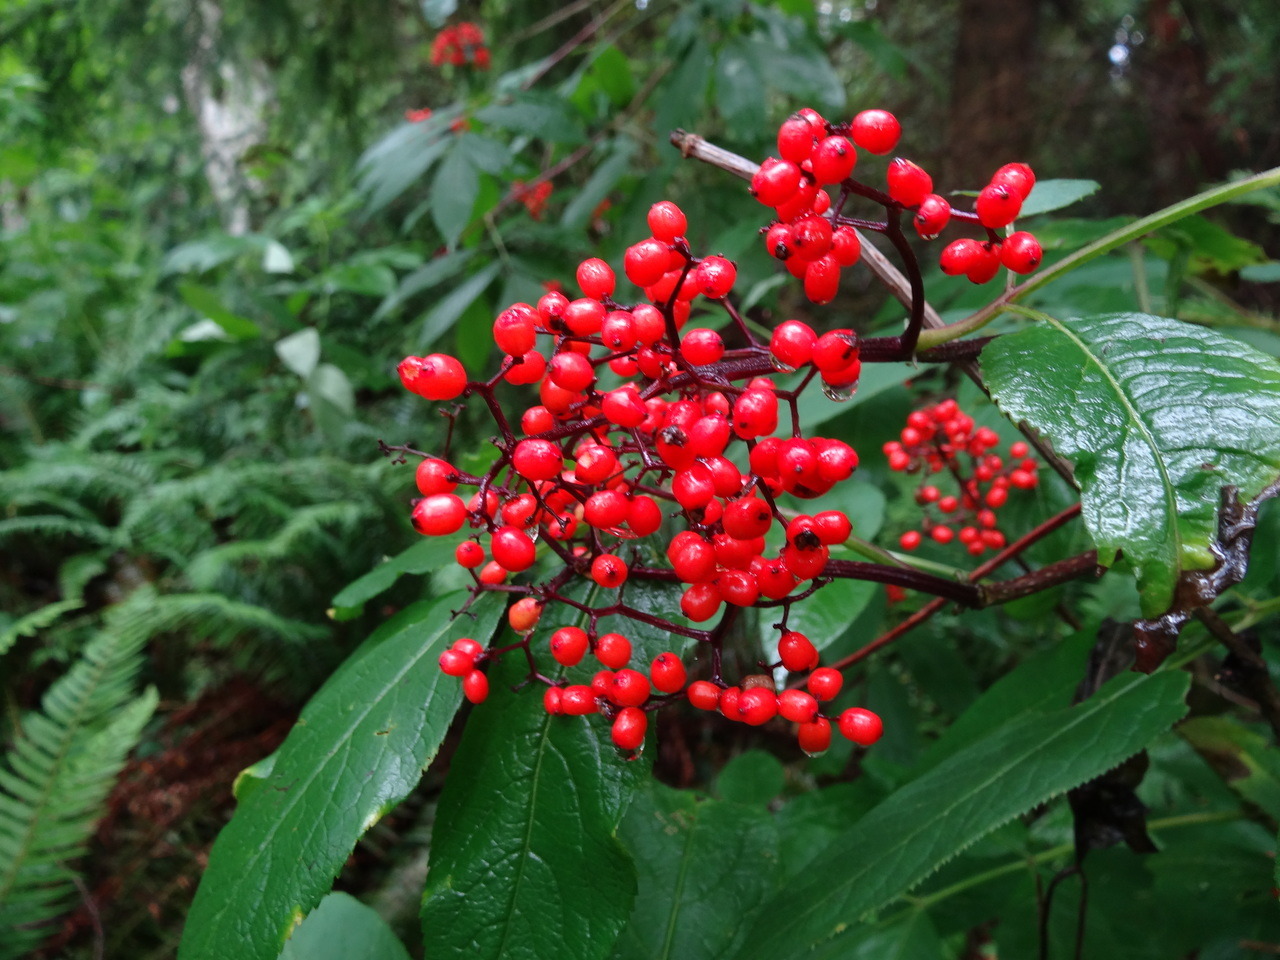 Sambucus racemosa, the red elderberry. Berries are poisonous when raw, but edible if cooked certain ways. Native peoples of the Pacific Northwest often used red elderberry for food and as a medicine for a variety of ailments.